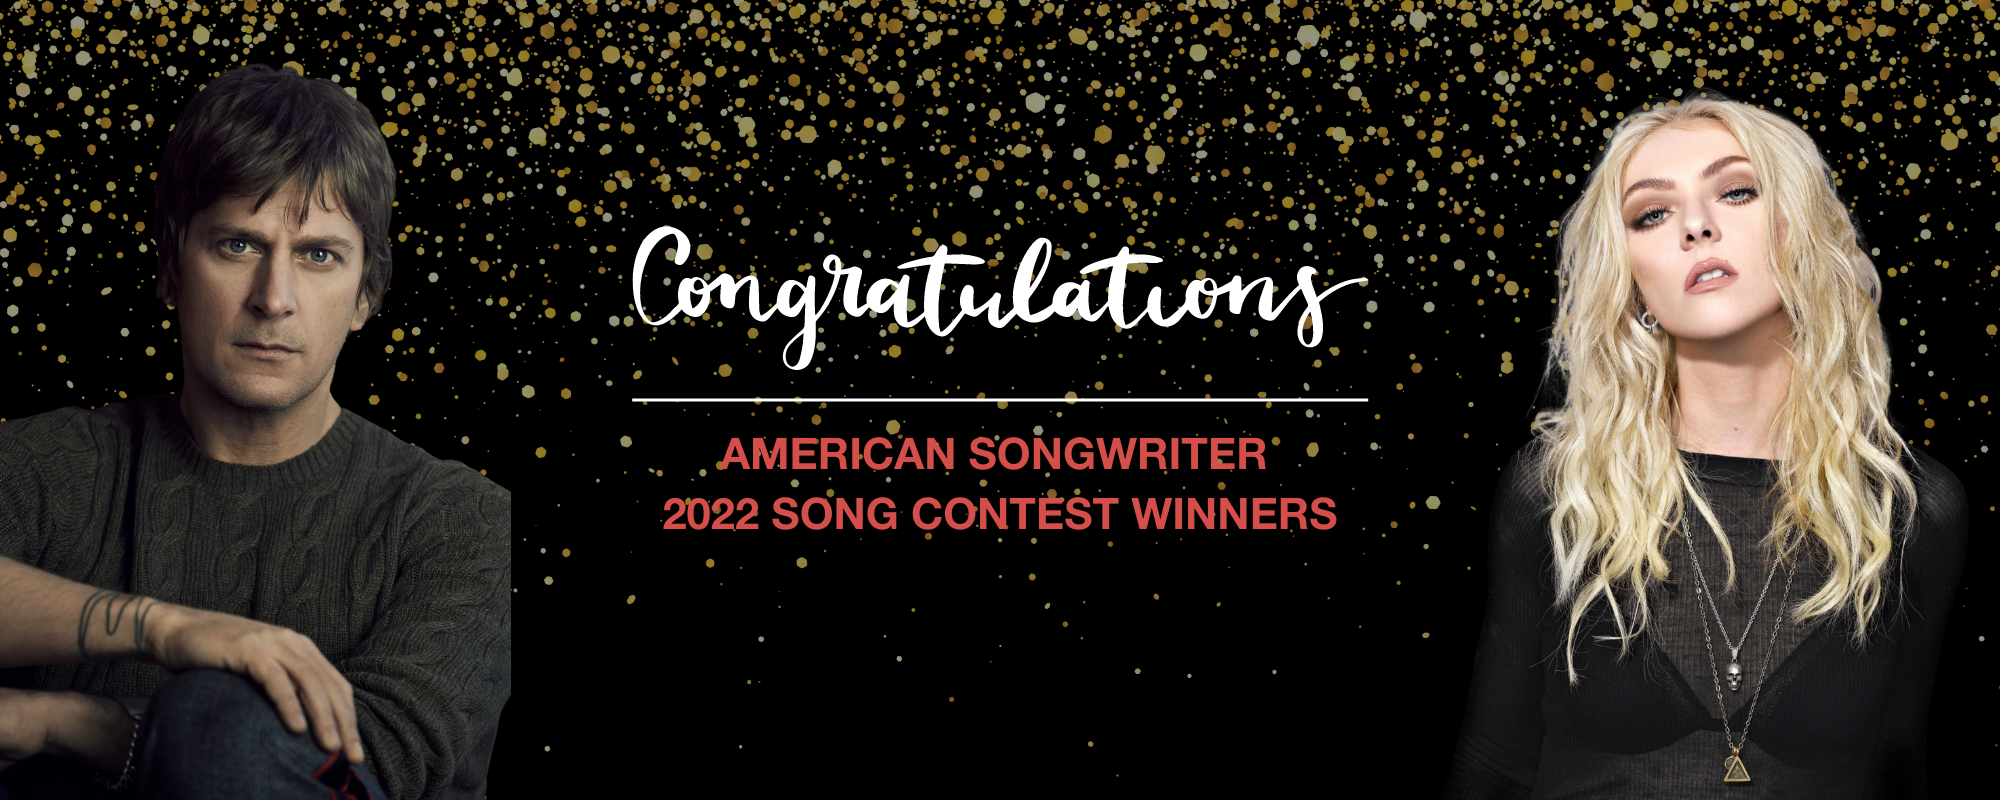 American Songwriter 2022 Song Contest Winners Announced